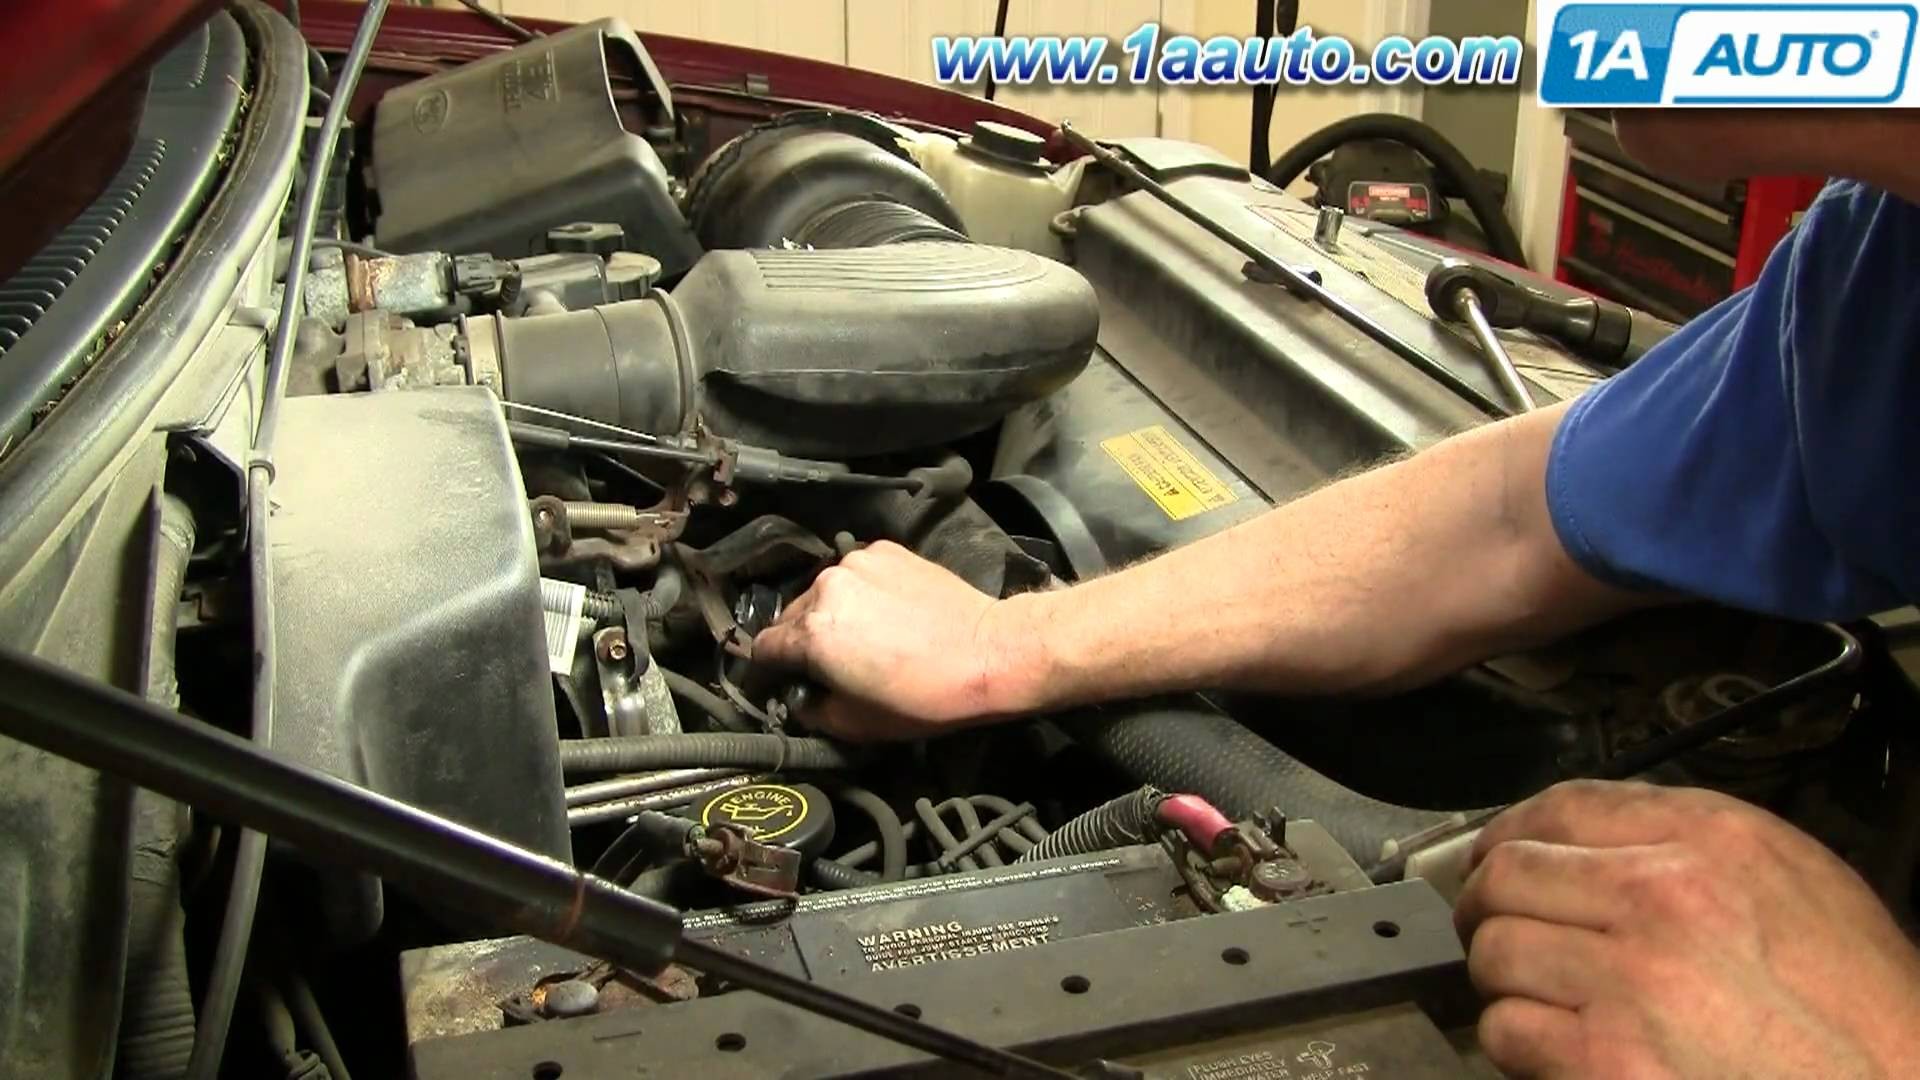 2000 Lincoln Navigator Engine Diagram How to Install Replace Alternator ford F 150 Expedition Lincoln